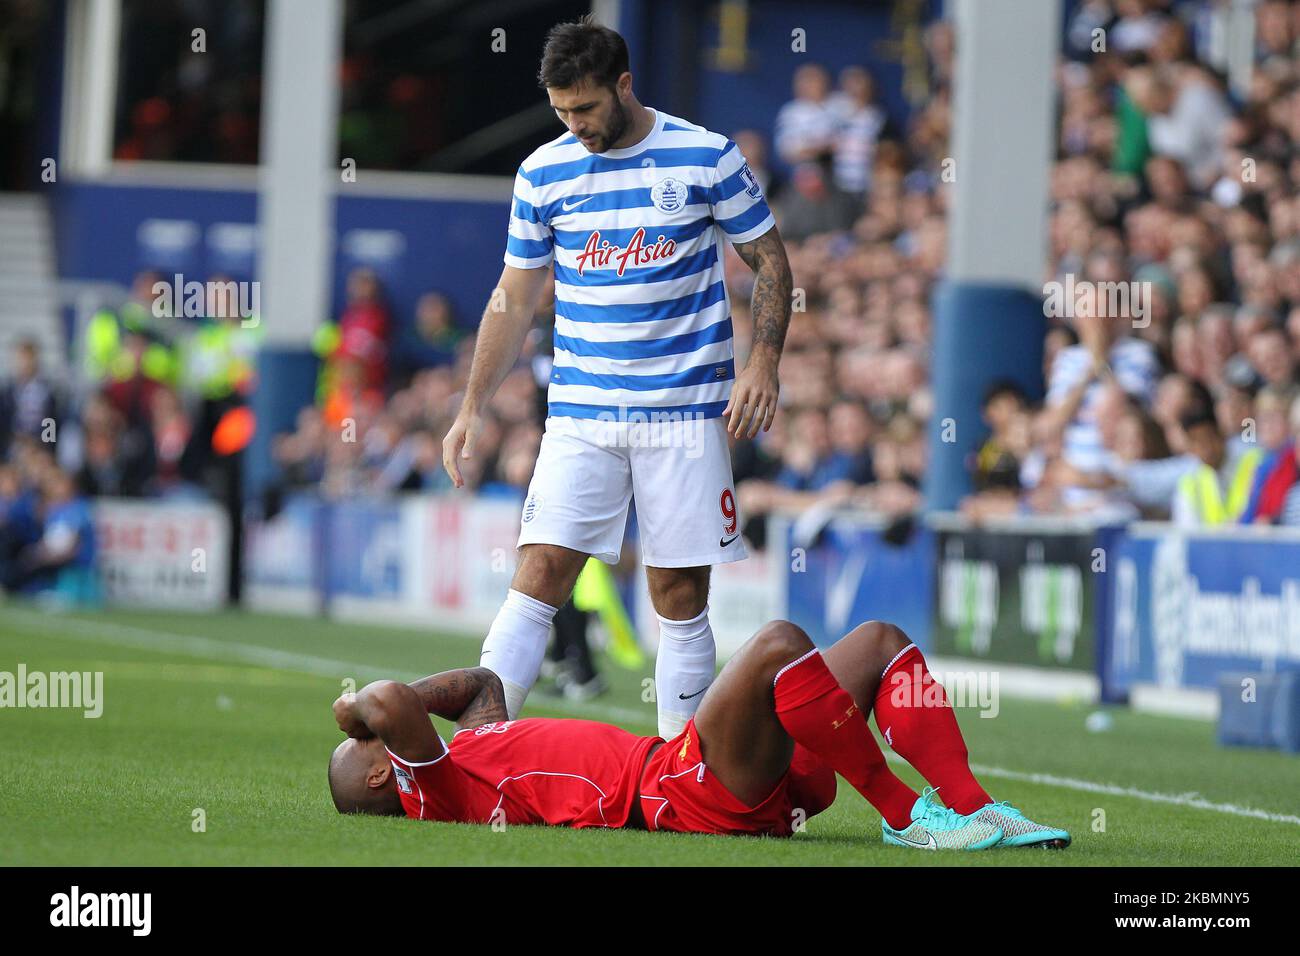 Queens Park Rangers Forward Charlie Austin stands over Liverpool Defender Glen Johnson as he goes down injured in the first half during the Barclays Premier League Match between Queens Park Rangers & Liverpool at Loftus Road, London on Sunday October 19th 2014 (Photo by MI News/NurPhoto) Stock Photo